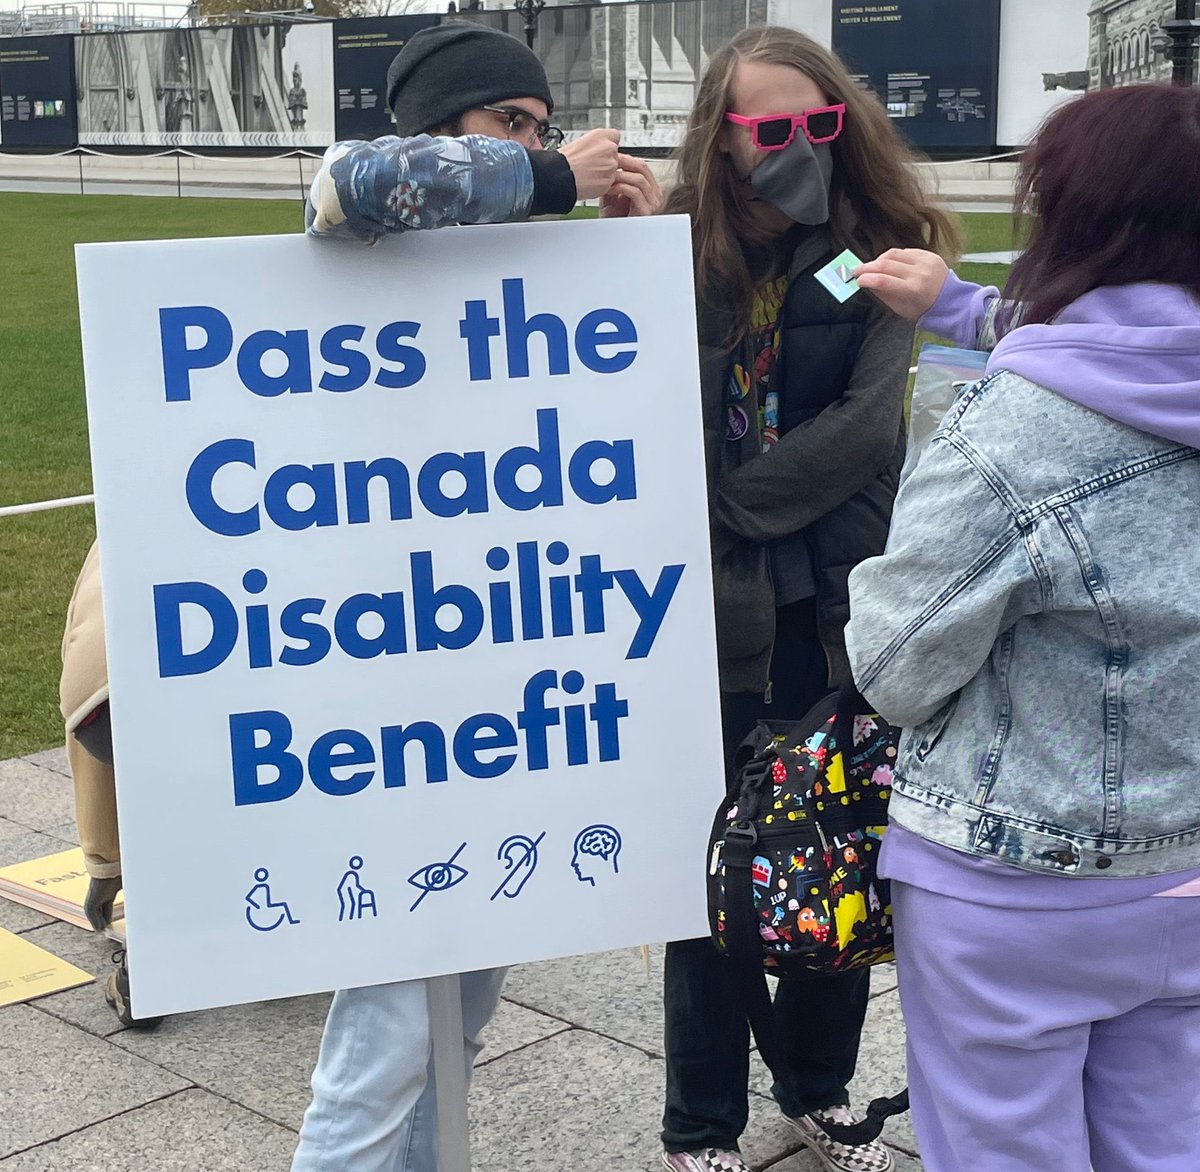 Disability poverty is legislated.

The solutions also need to be legislated. 

The solutions start today when the @SenateCA passes the #CanadaDisabilityBenefit. 

Make history, then #BudgetTheBenefit.